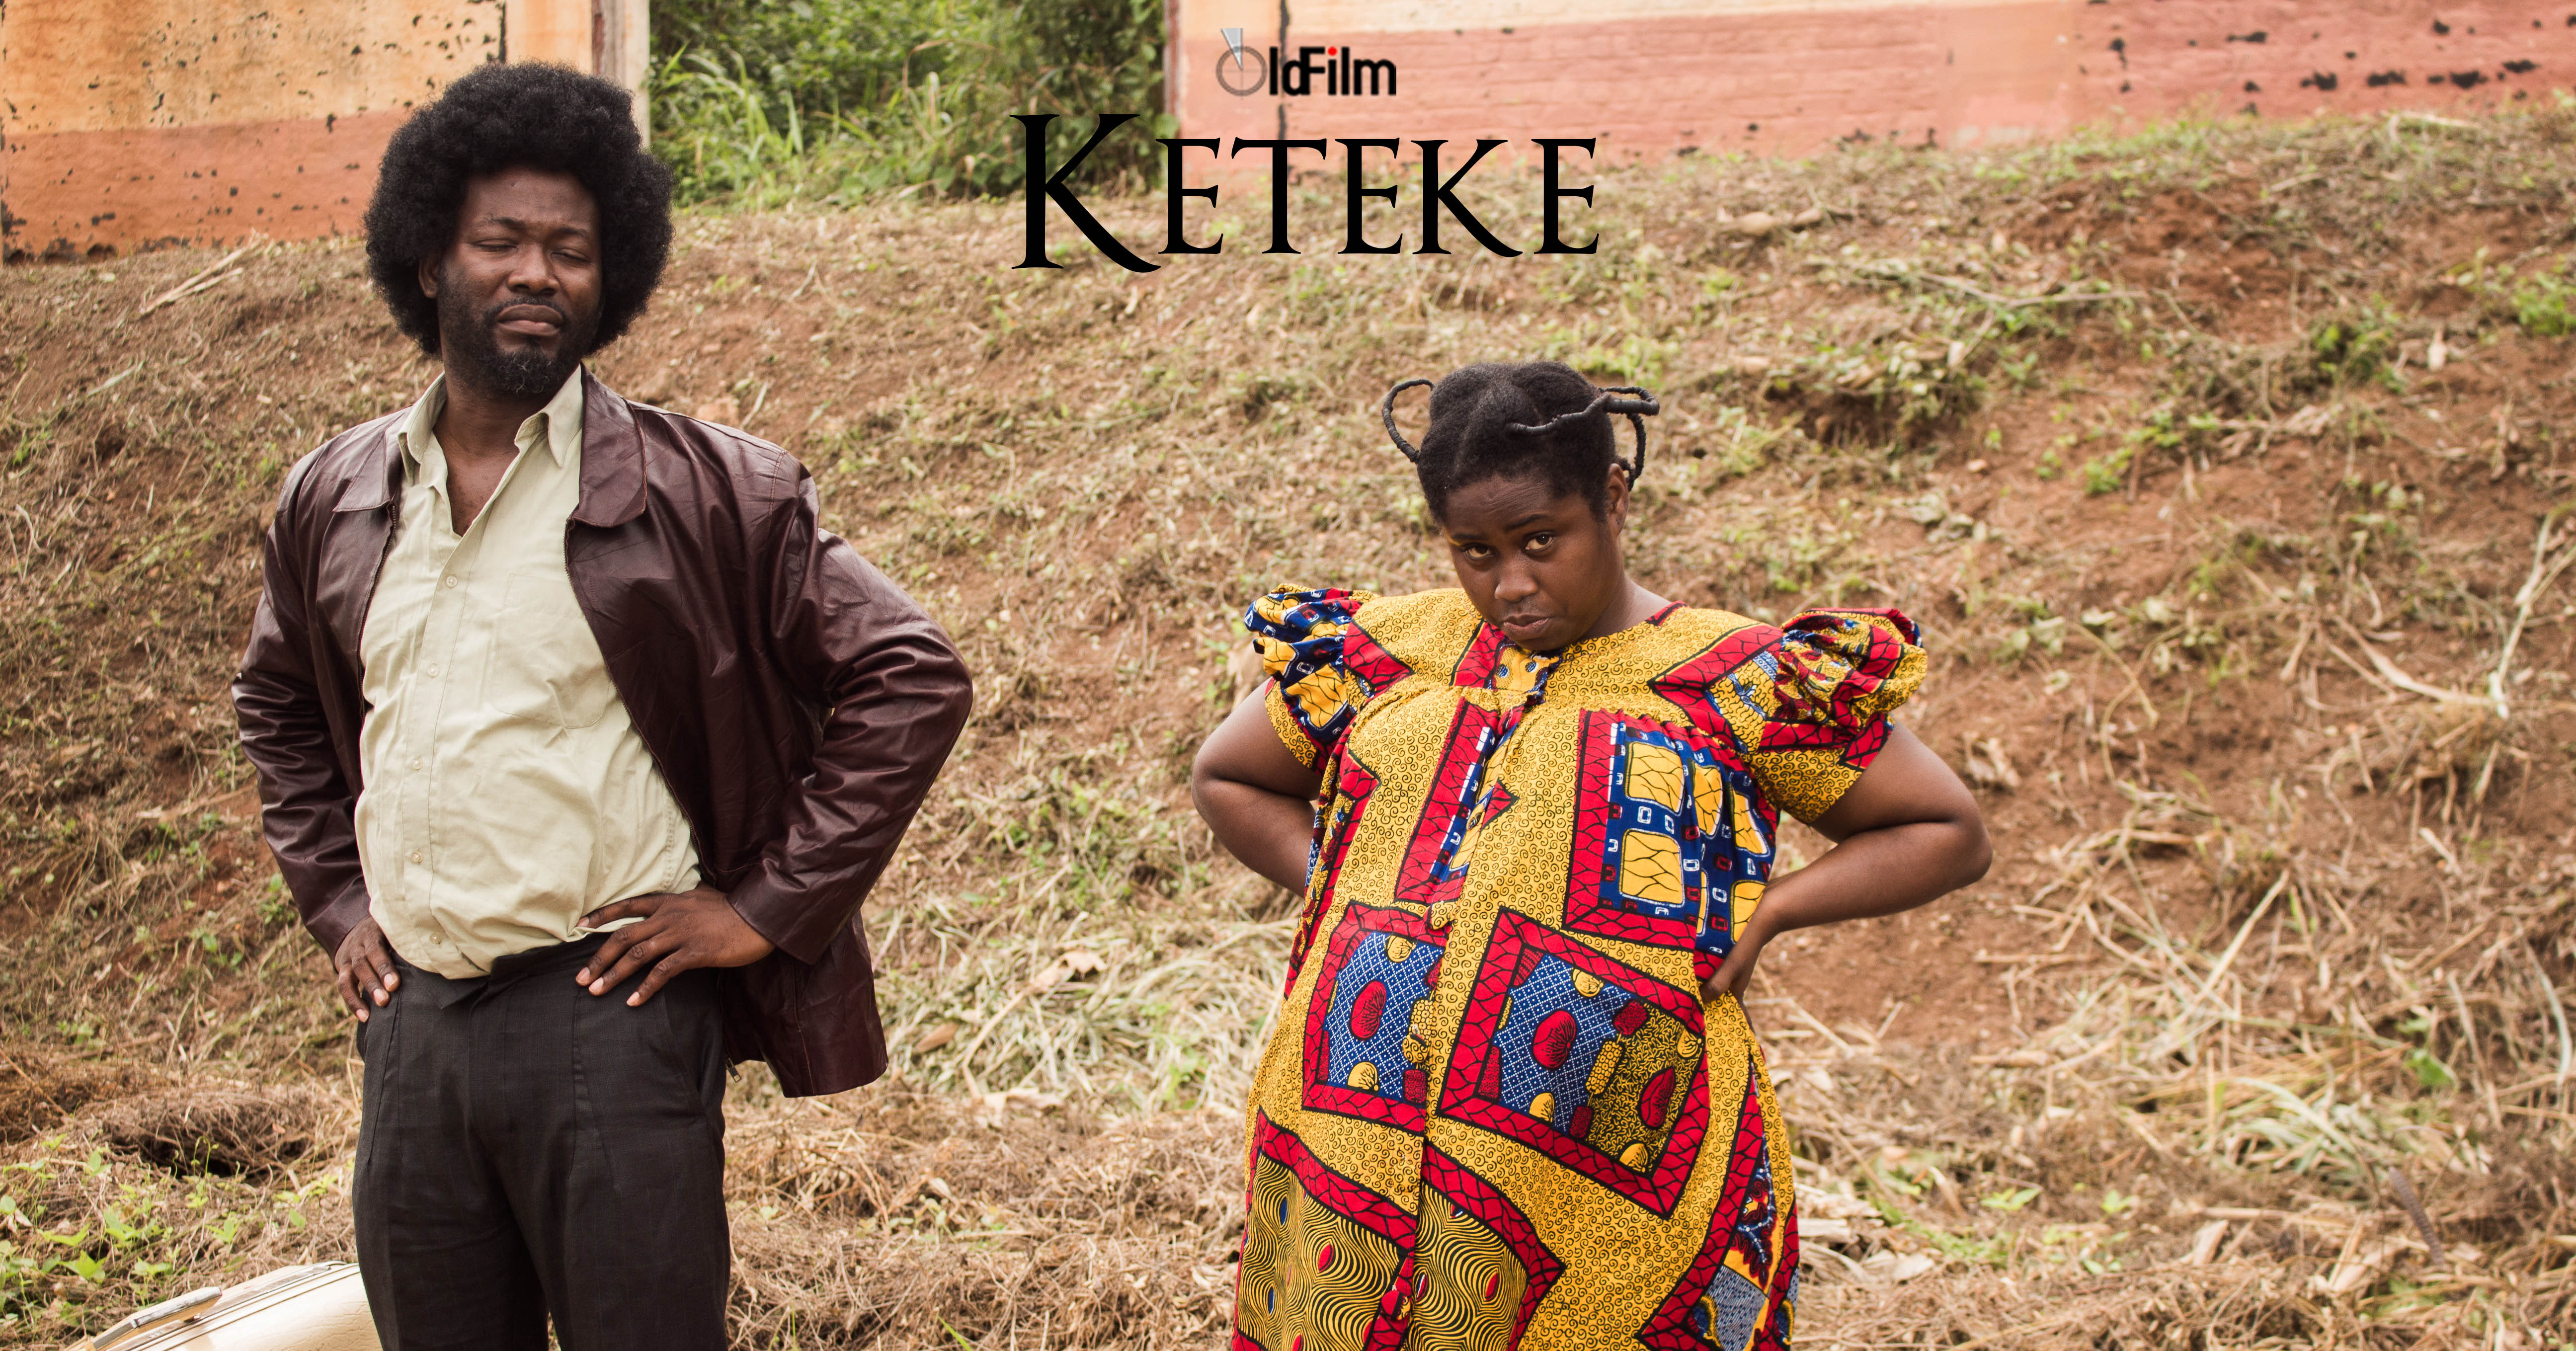 Ghana’s ‘Keteke’ Nominated Along With Films From 15 African Countries For 2019 FESPACO Awards